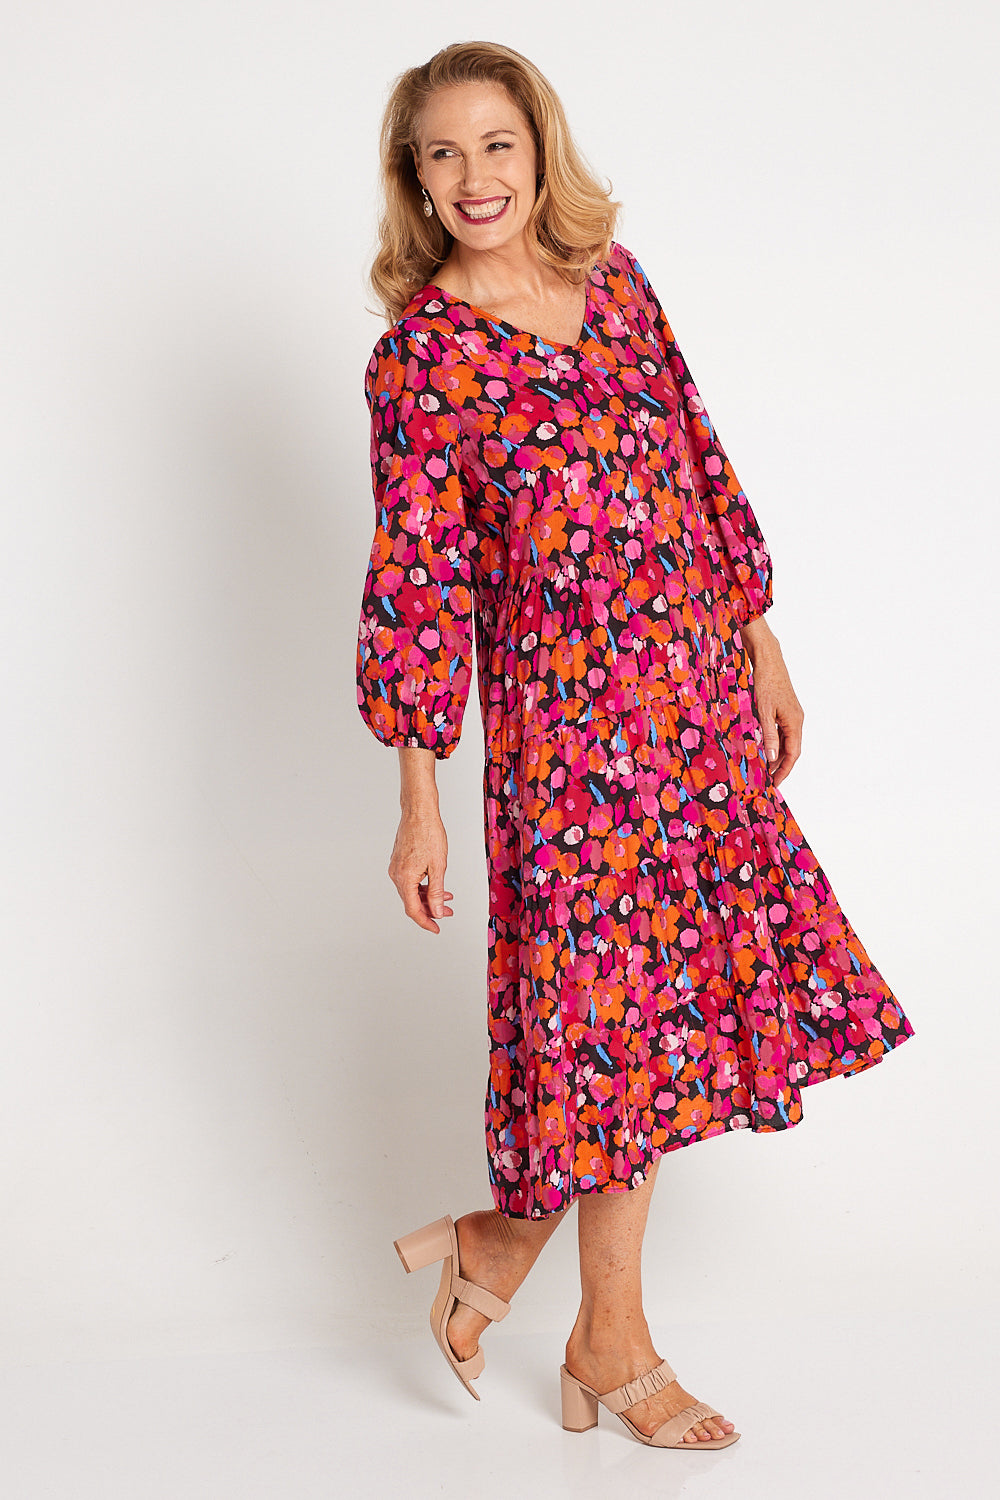 Janie Dress - Brushed Floral